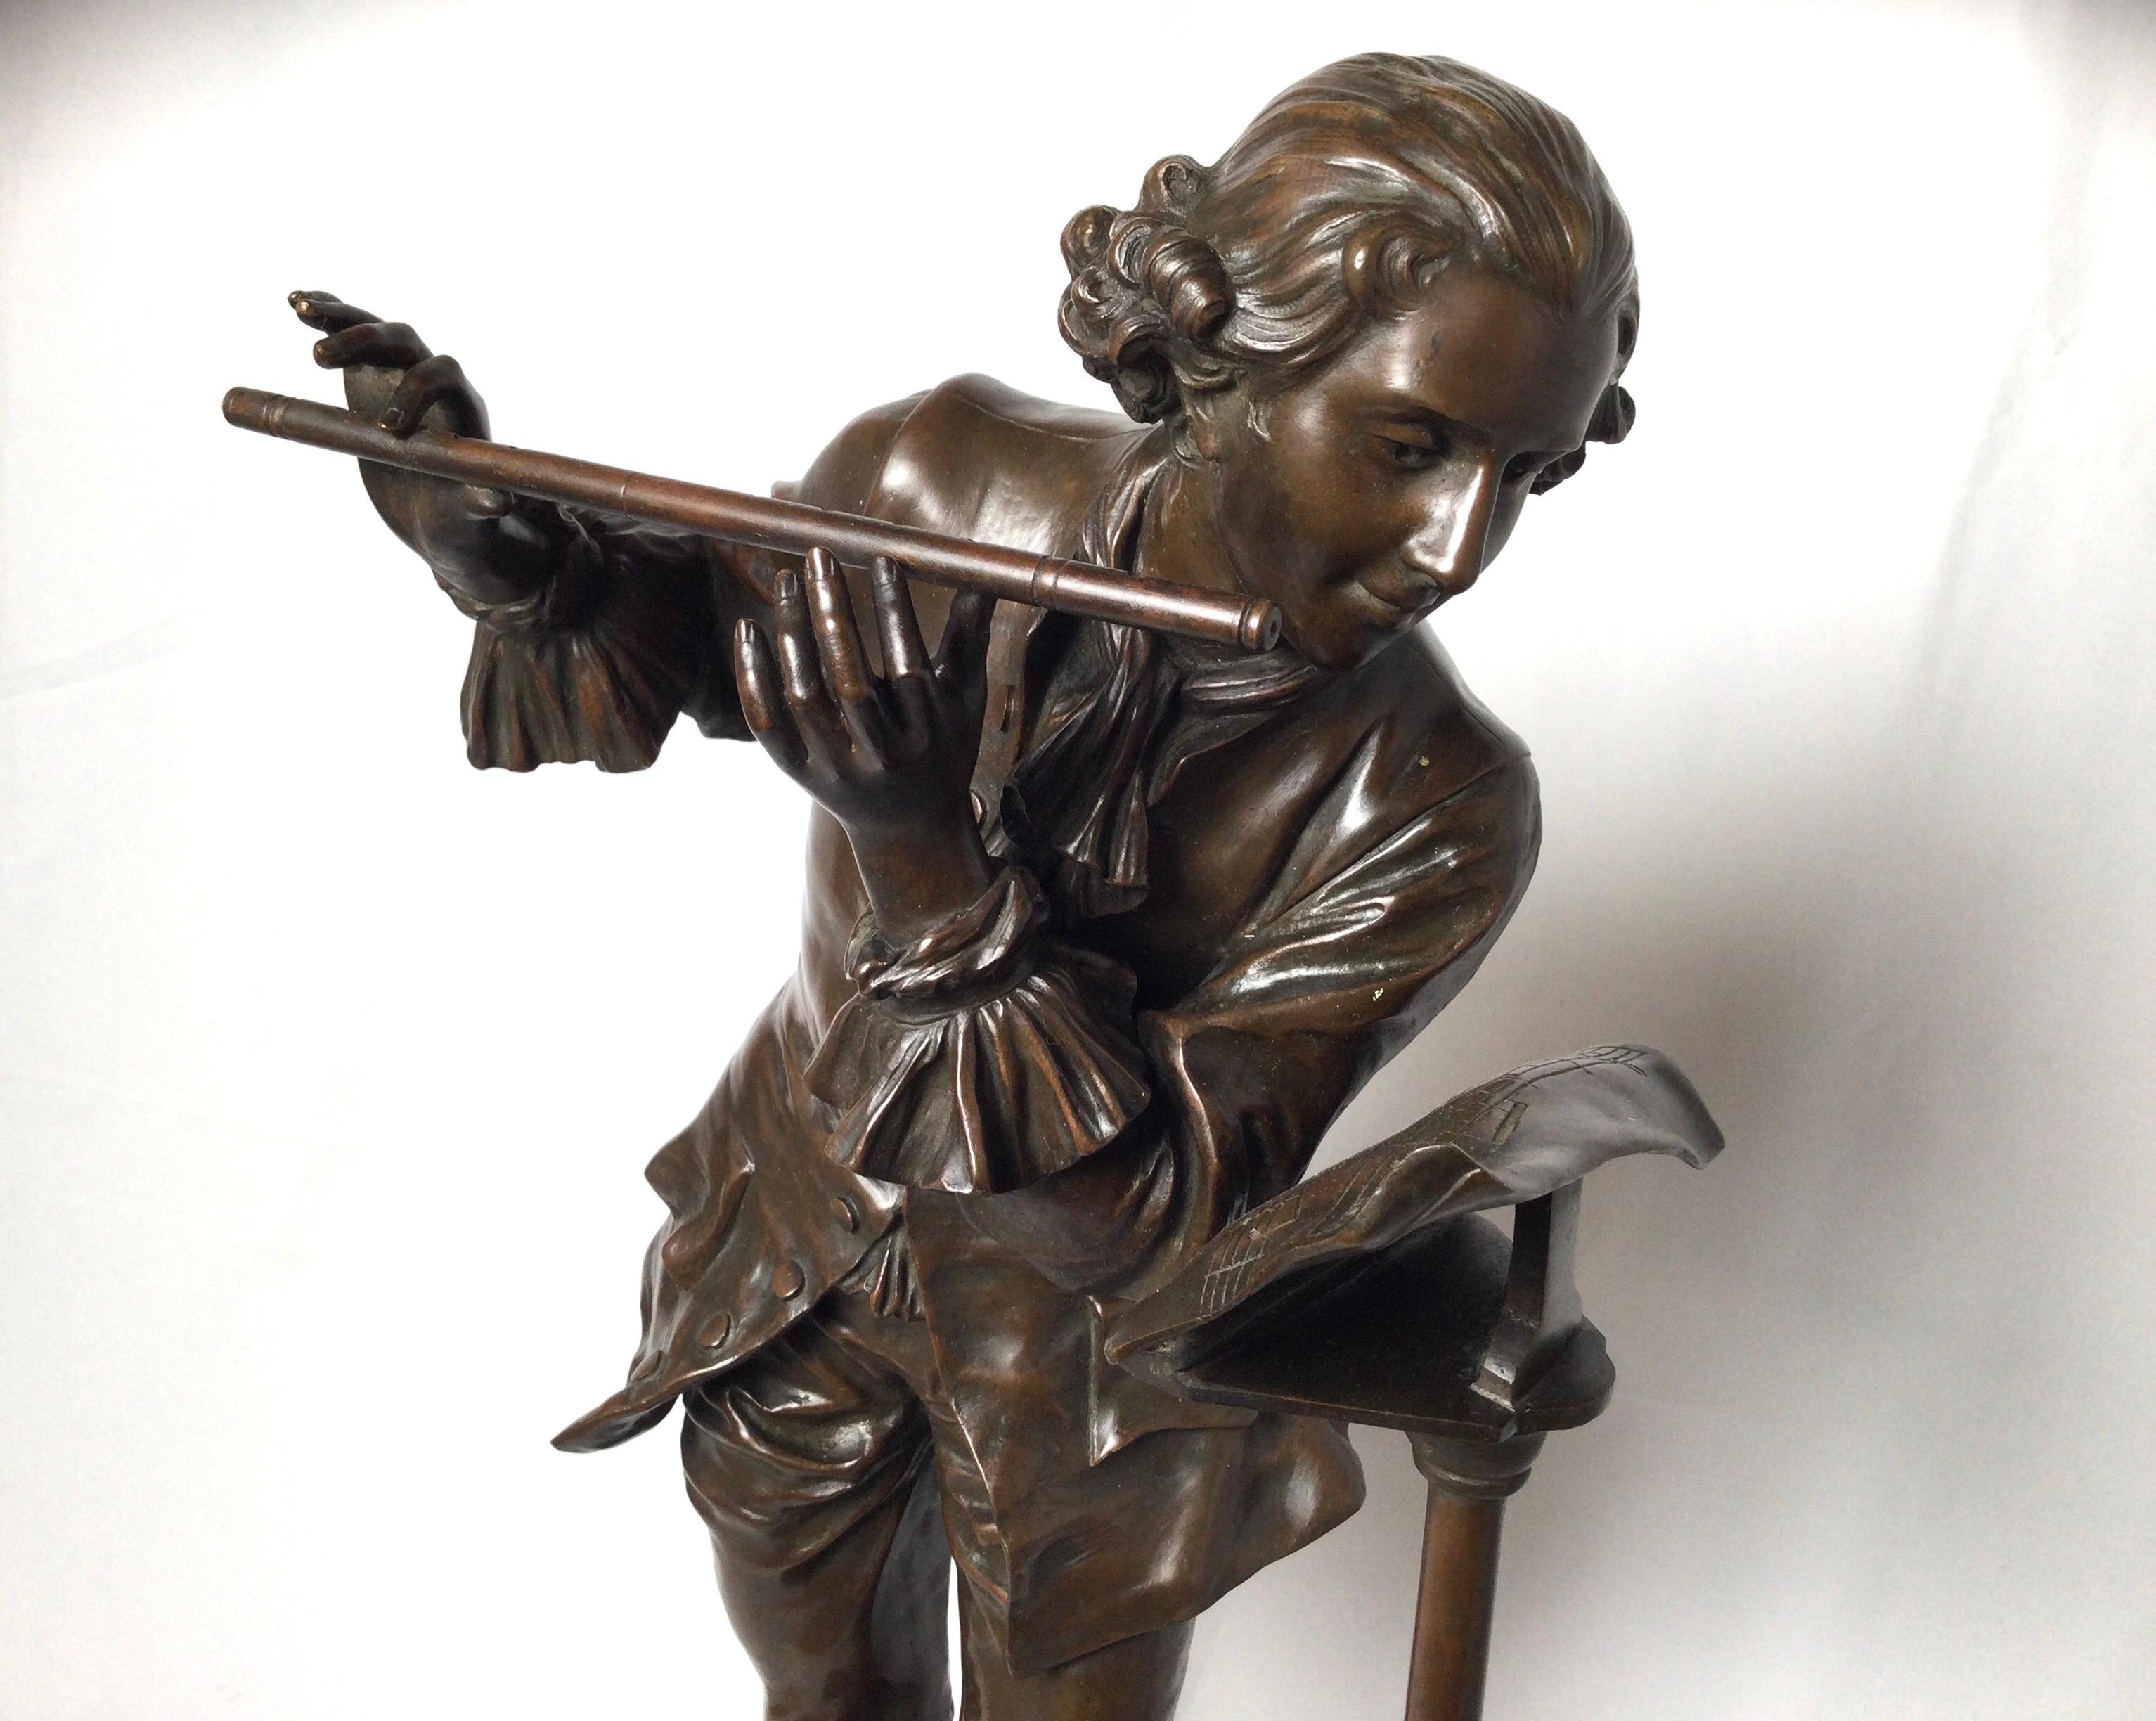 A patinated bronze figure of a flute player by Adrinne Gaudes, France, 1880s in a classical 18th century style. The sculpture is signed on the front at the base on a shield label.